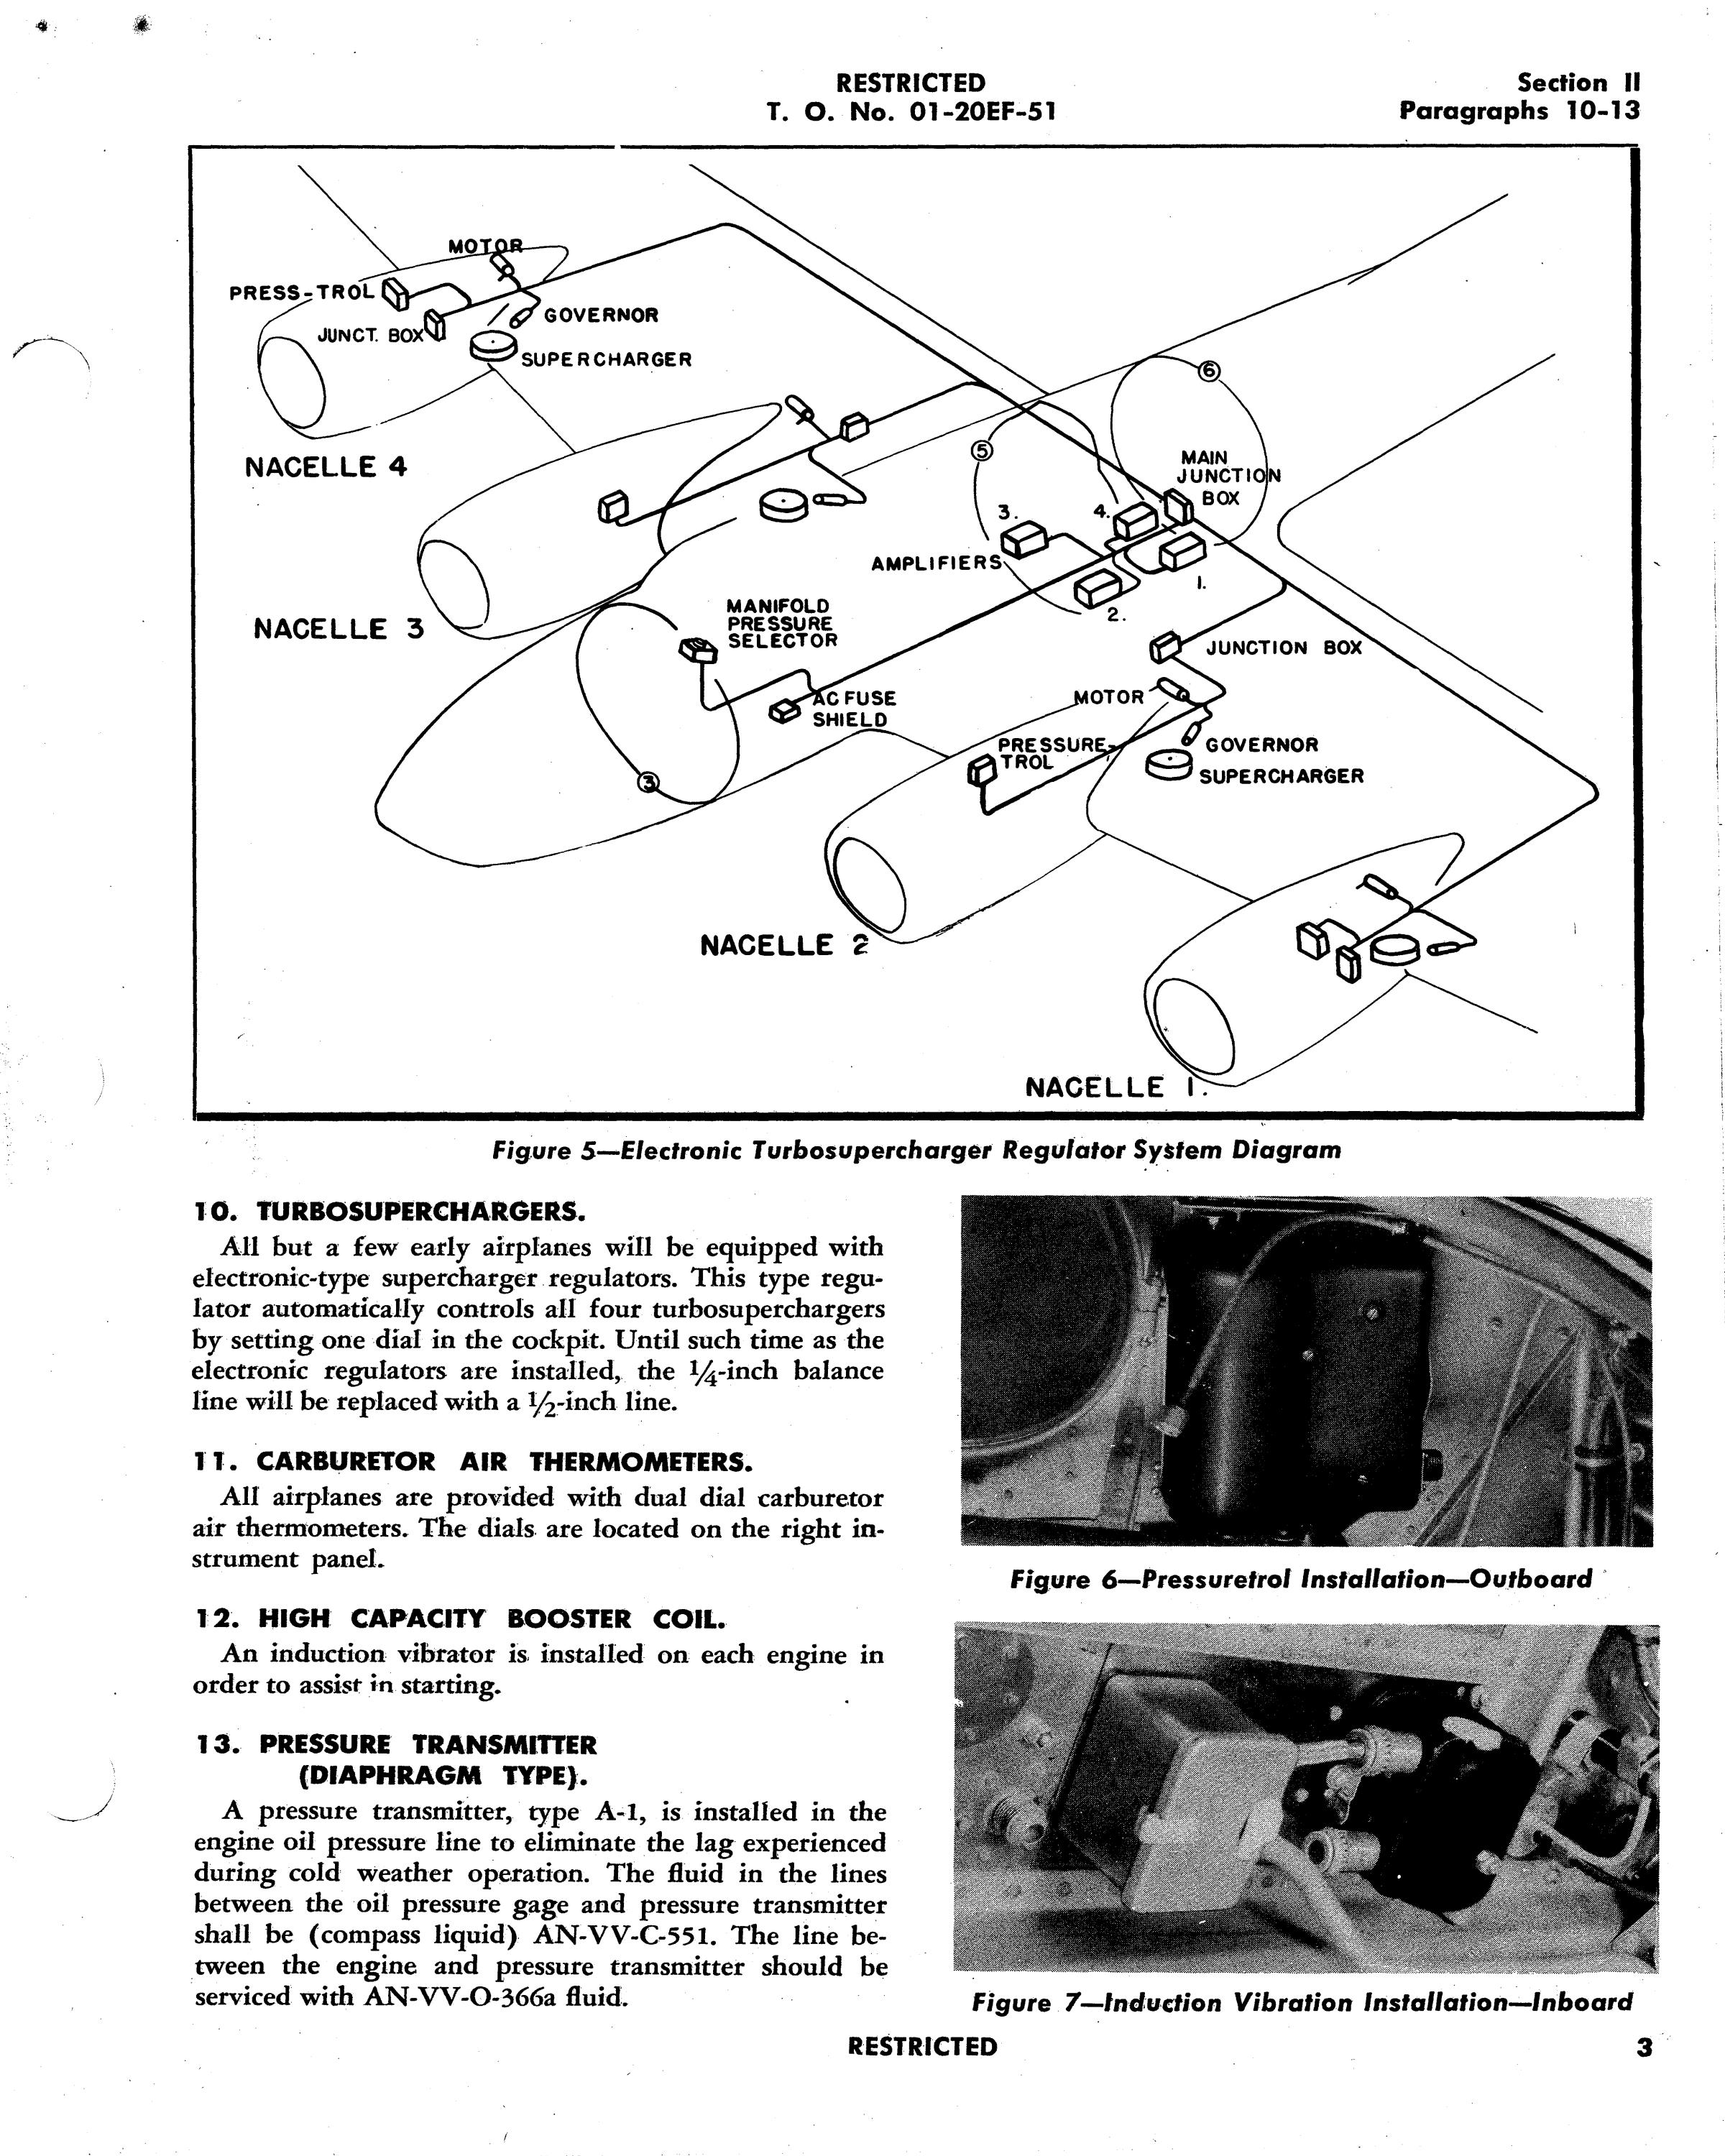 Sample page 7 from AirCorps Library document: Handbook of Cold Weather Operations & Maintenance - B17F, B-17G